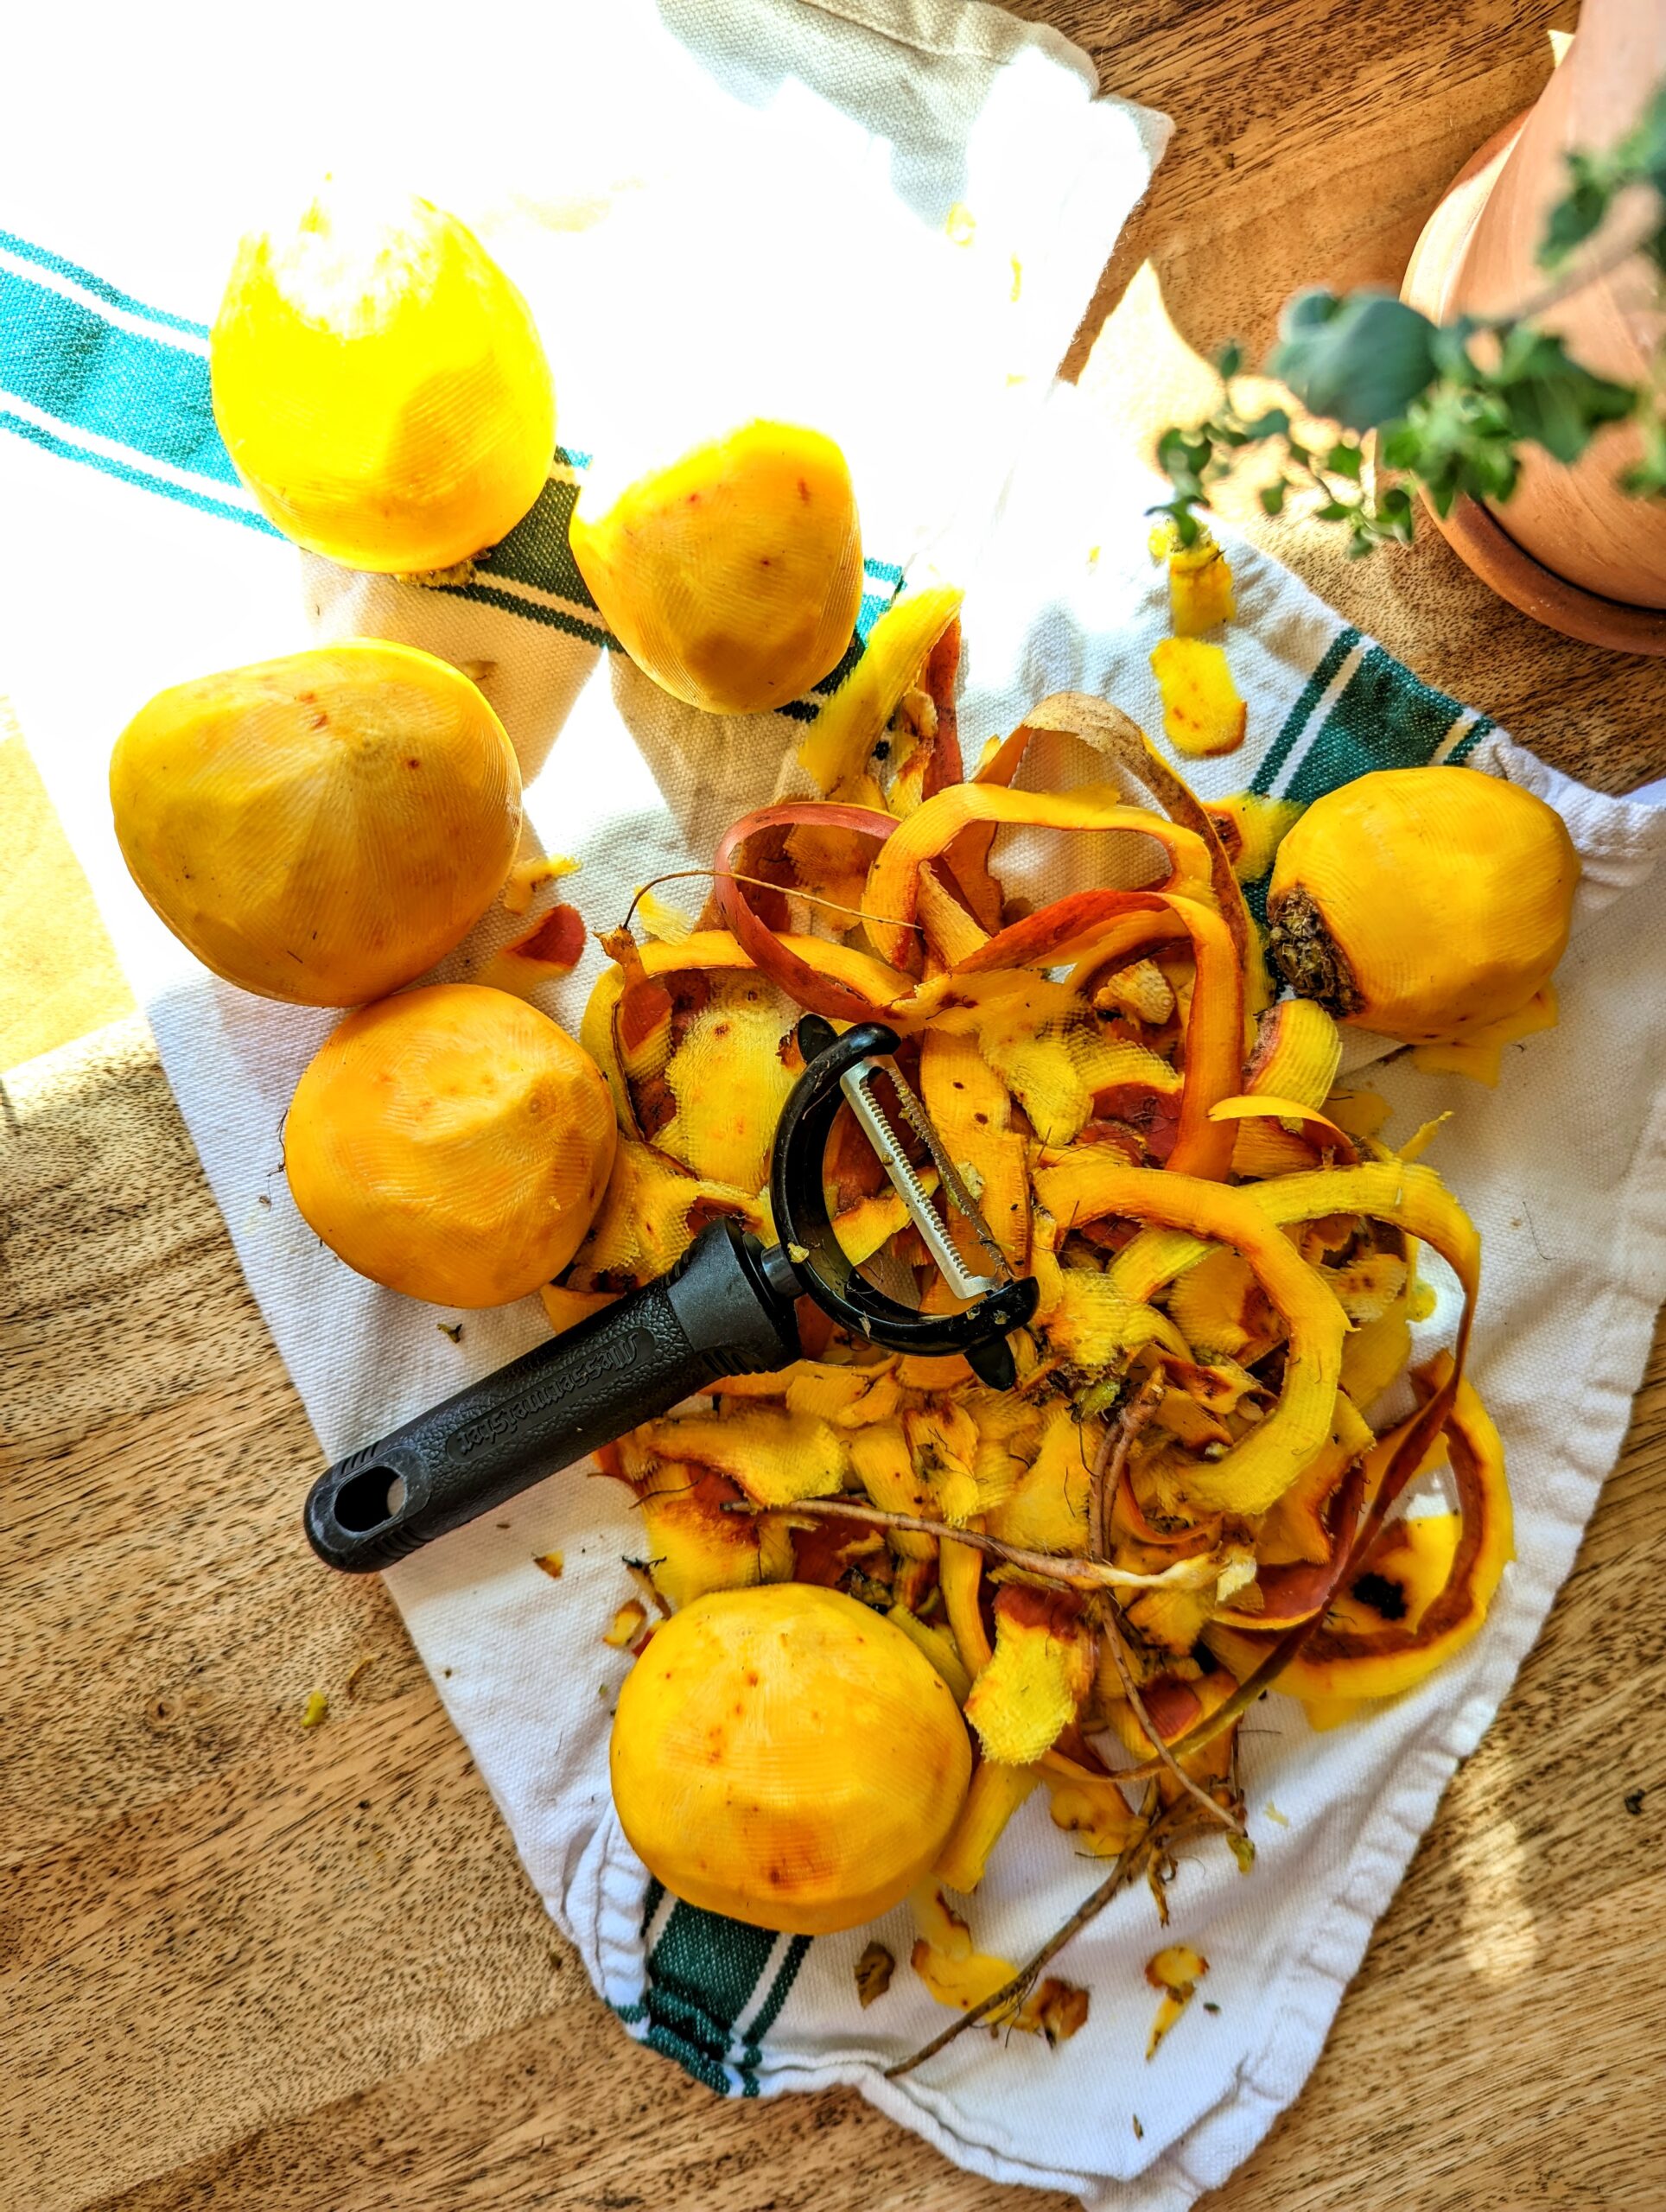 Six freshly peeled golden beets resting on a white and green kitchen towel. All of the beet shavings are in a pile in the middle of the kitchen towel.